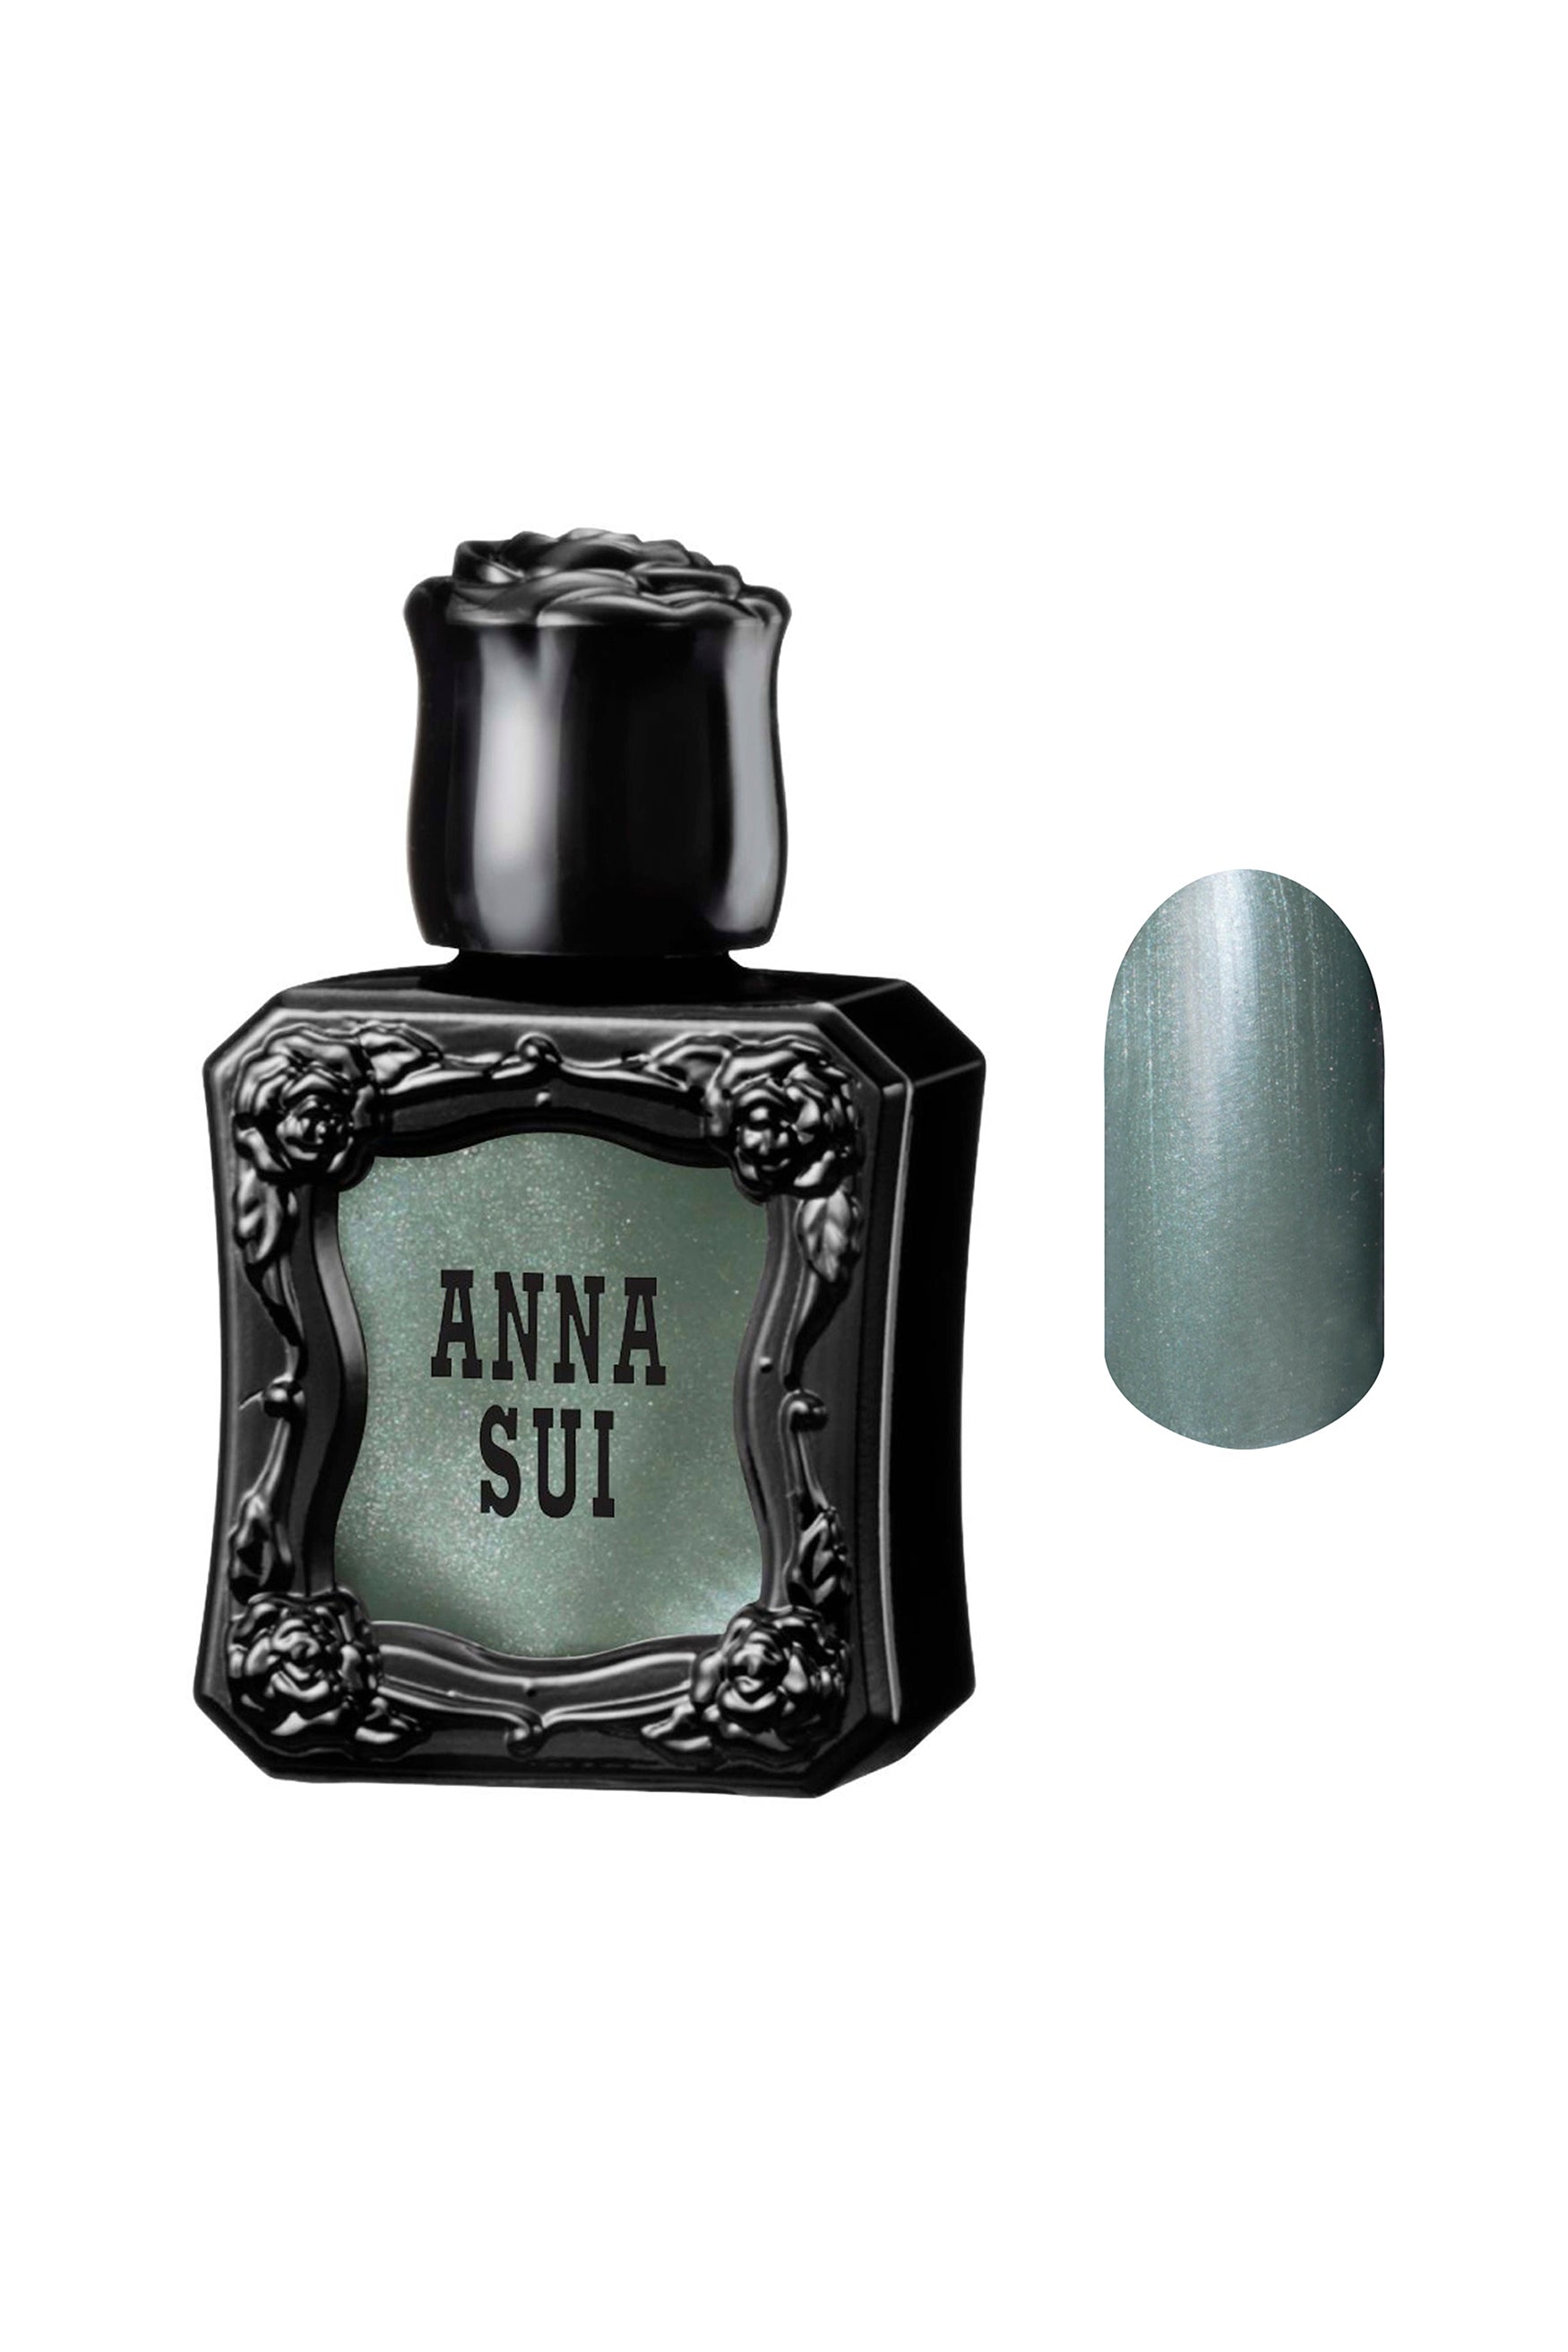 BAMBOO GREEN Nail Polish bottles, with raised rose pattern, Anna Sui in black over nail colors in bottle front